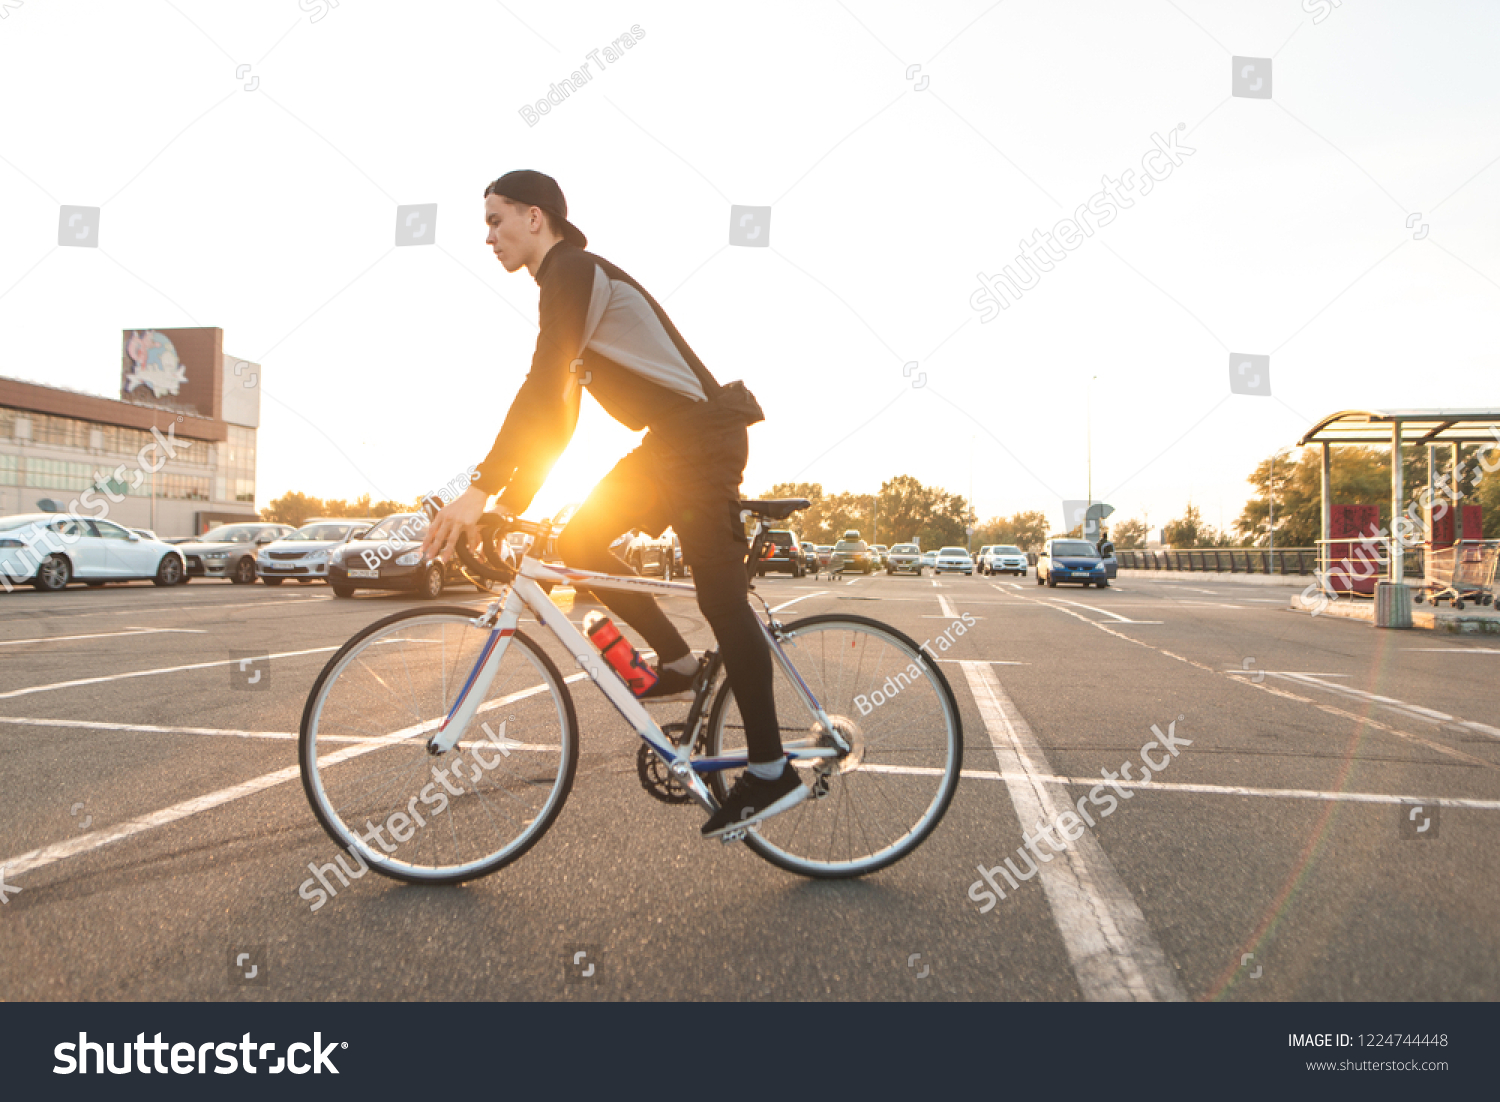 Portrait of an attractive cyclist in motion. Young rider in dark bike wears a bike on a street background and sunshine in the sunset. #1224744448